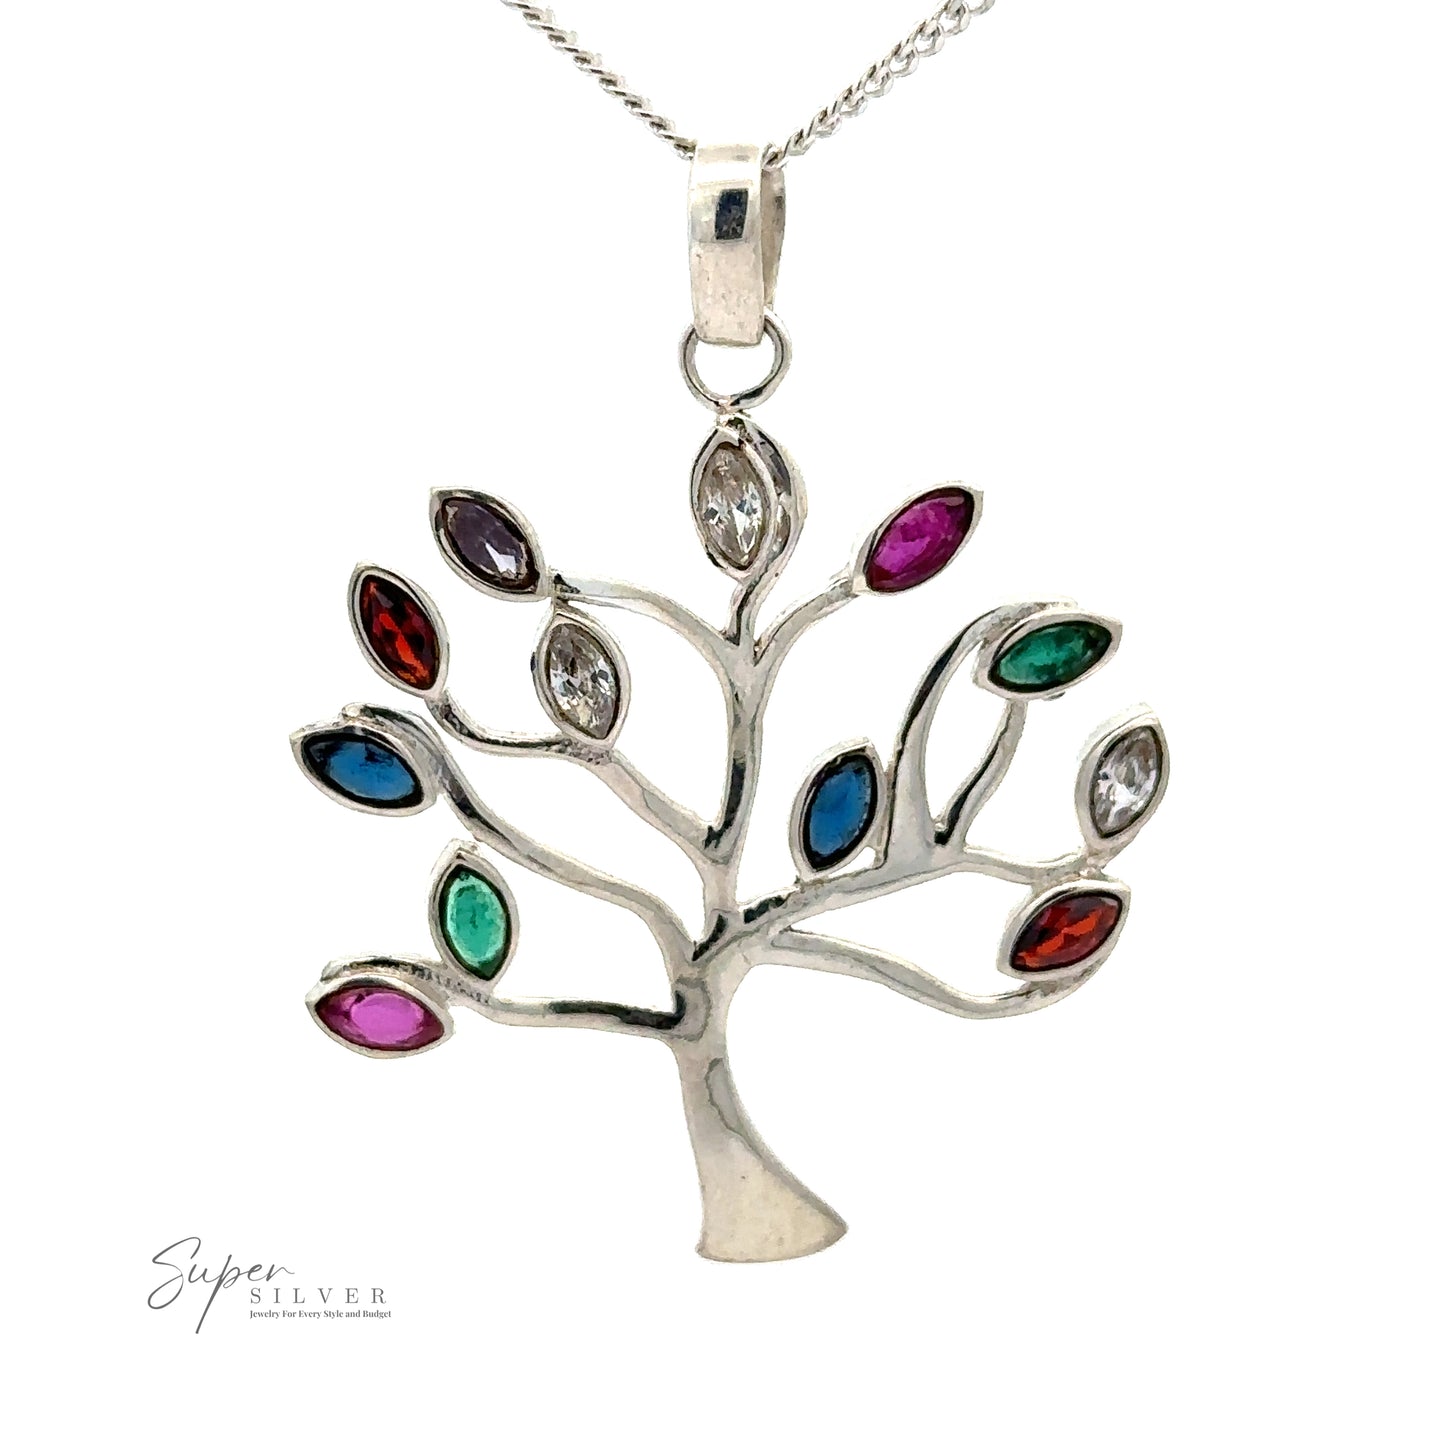 A Tree of Life Pendant with Stone Leaves necklace with ten faceted stone leaves in vibrant red, green, blue, purple, and clear hues. The chain is also sterling silver. The logo reads "Super Silver.